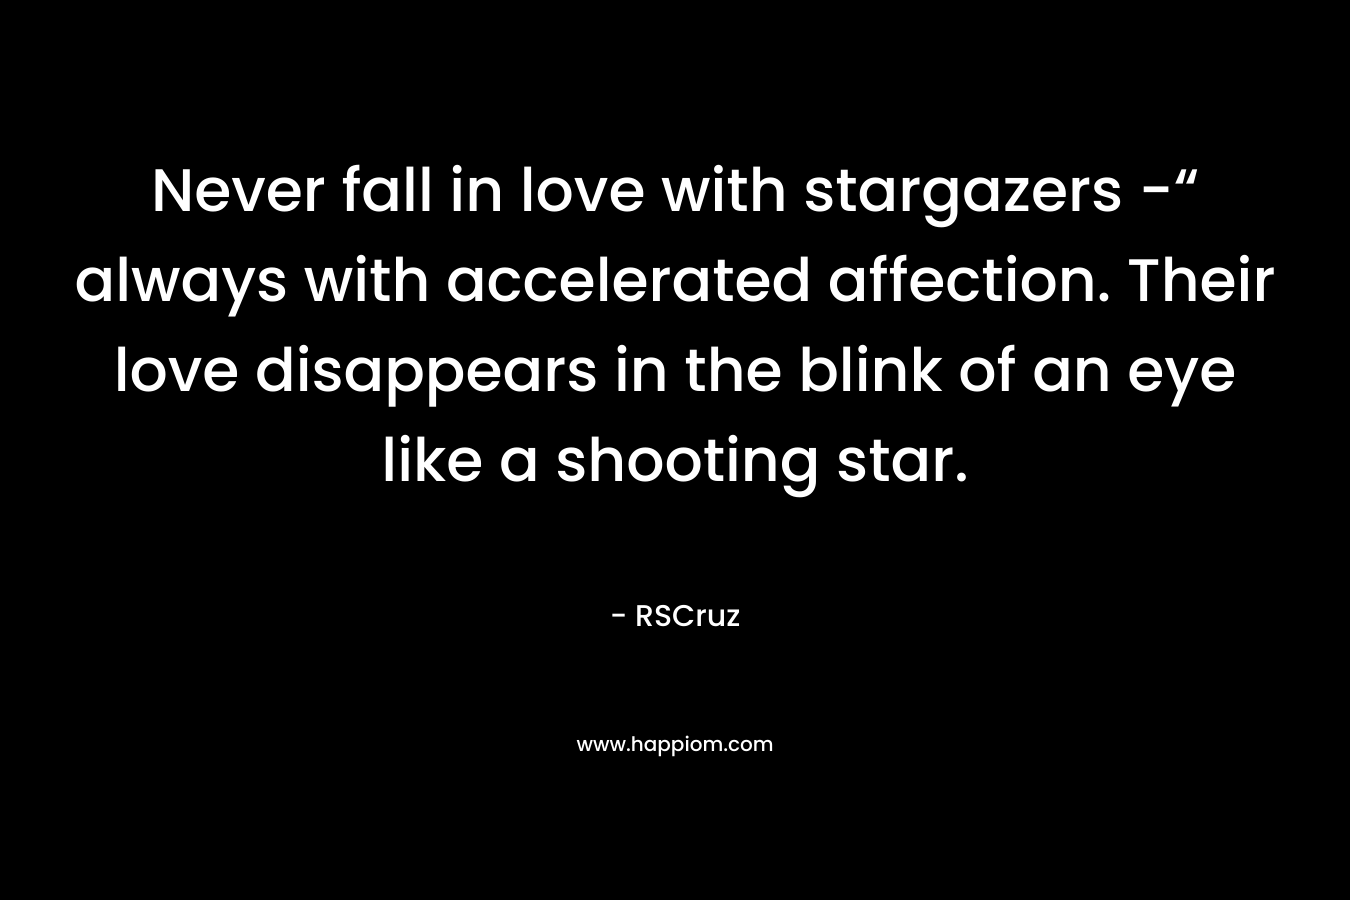 Never fall in love with stargazers -“ always with accelerated affection. Their love disappears in the blink of an eye like a shooting star. – RSCruz